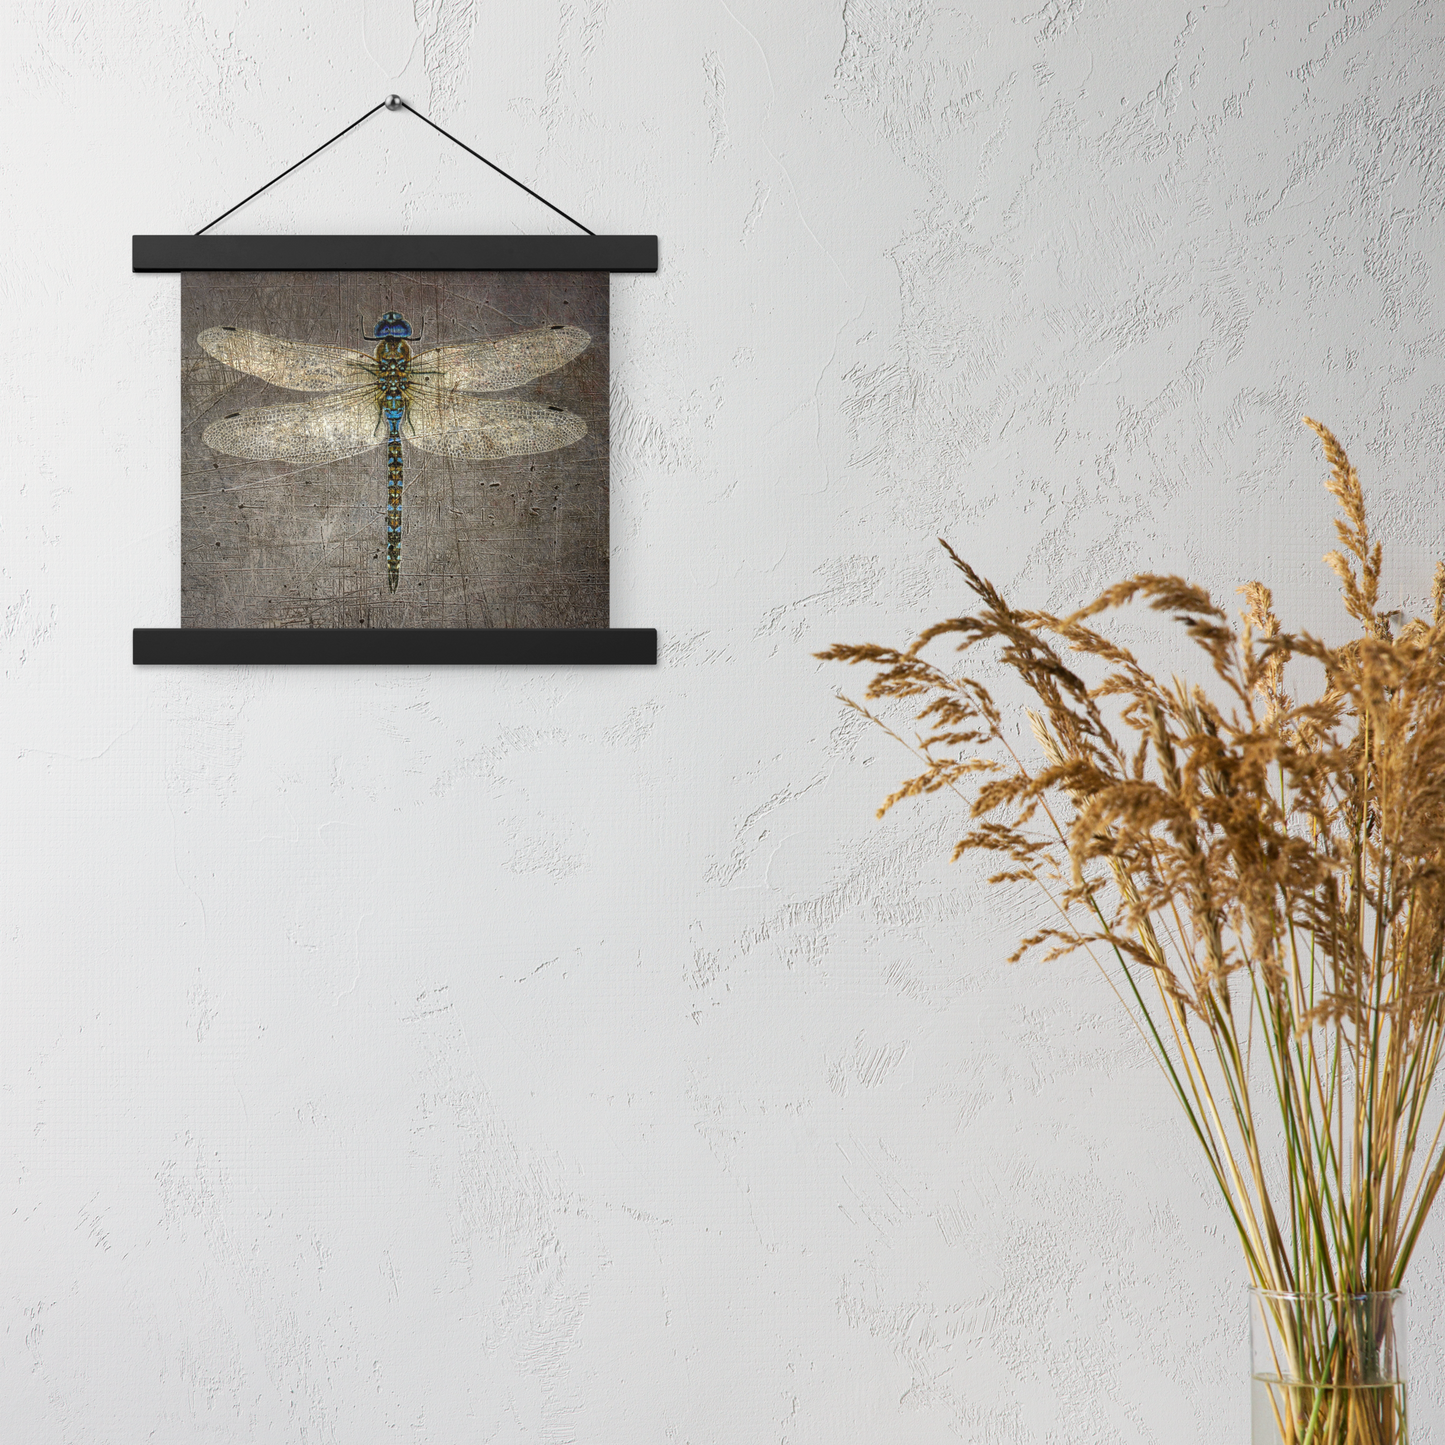 Dragonfly Themed Wall Hanging Dragonfly on Distressed Stone Background Print on Archival Paper with Magnetic Wood Hangers 14x14 hung